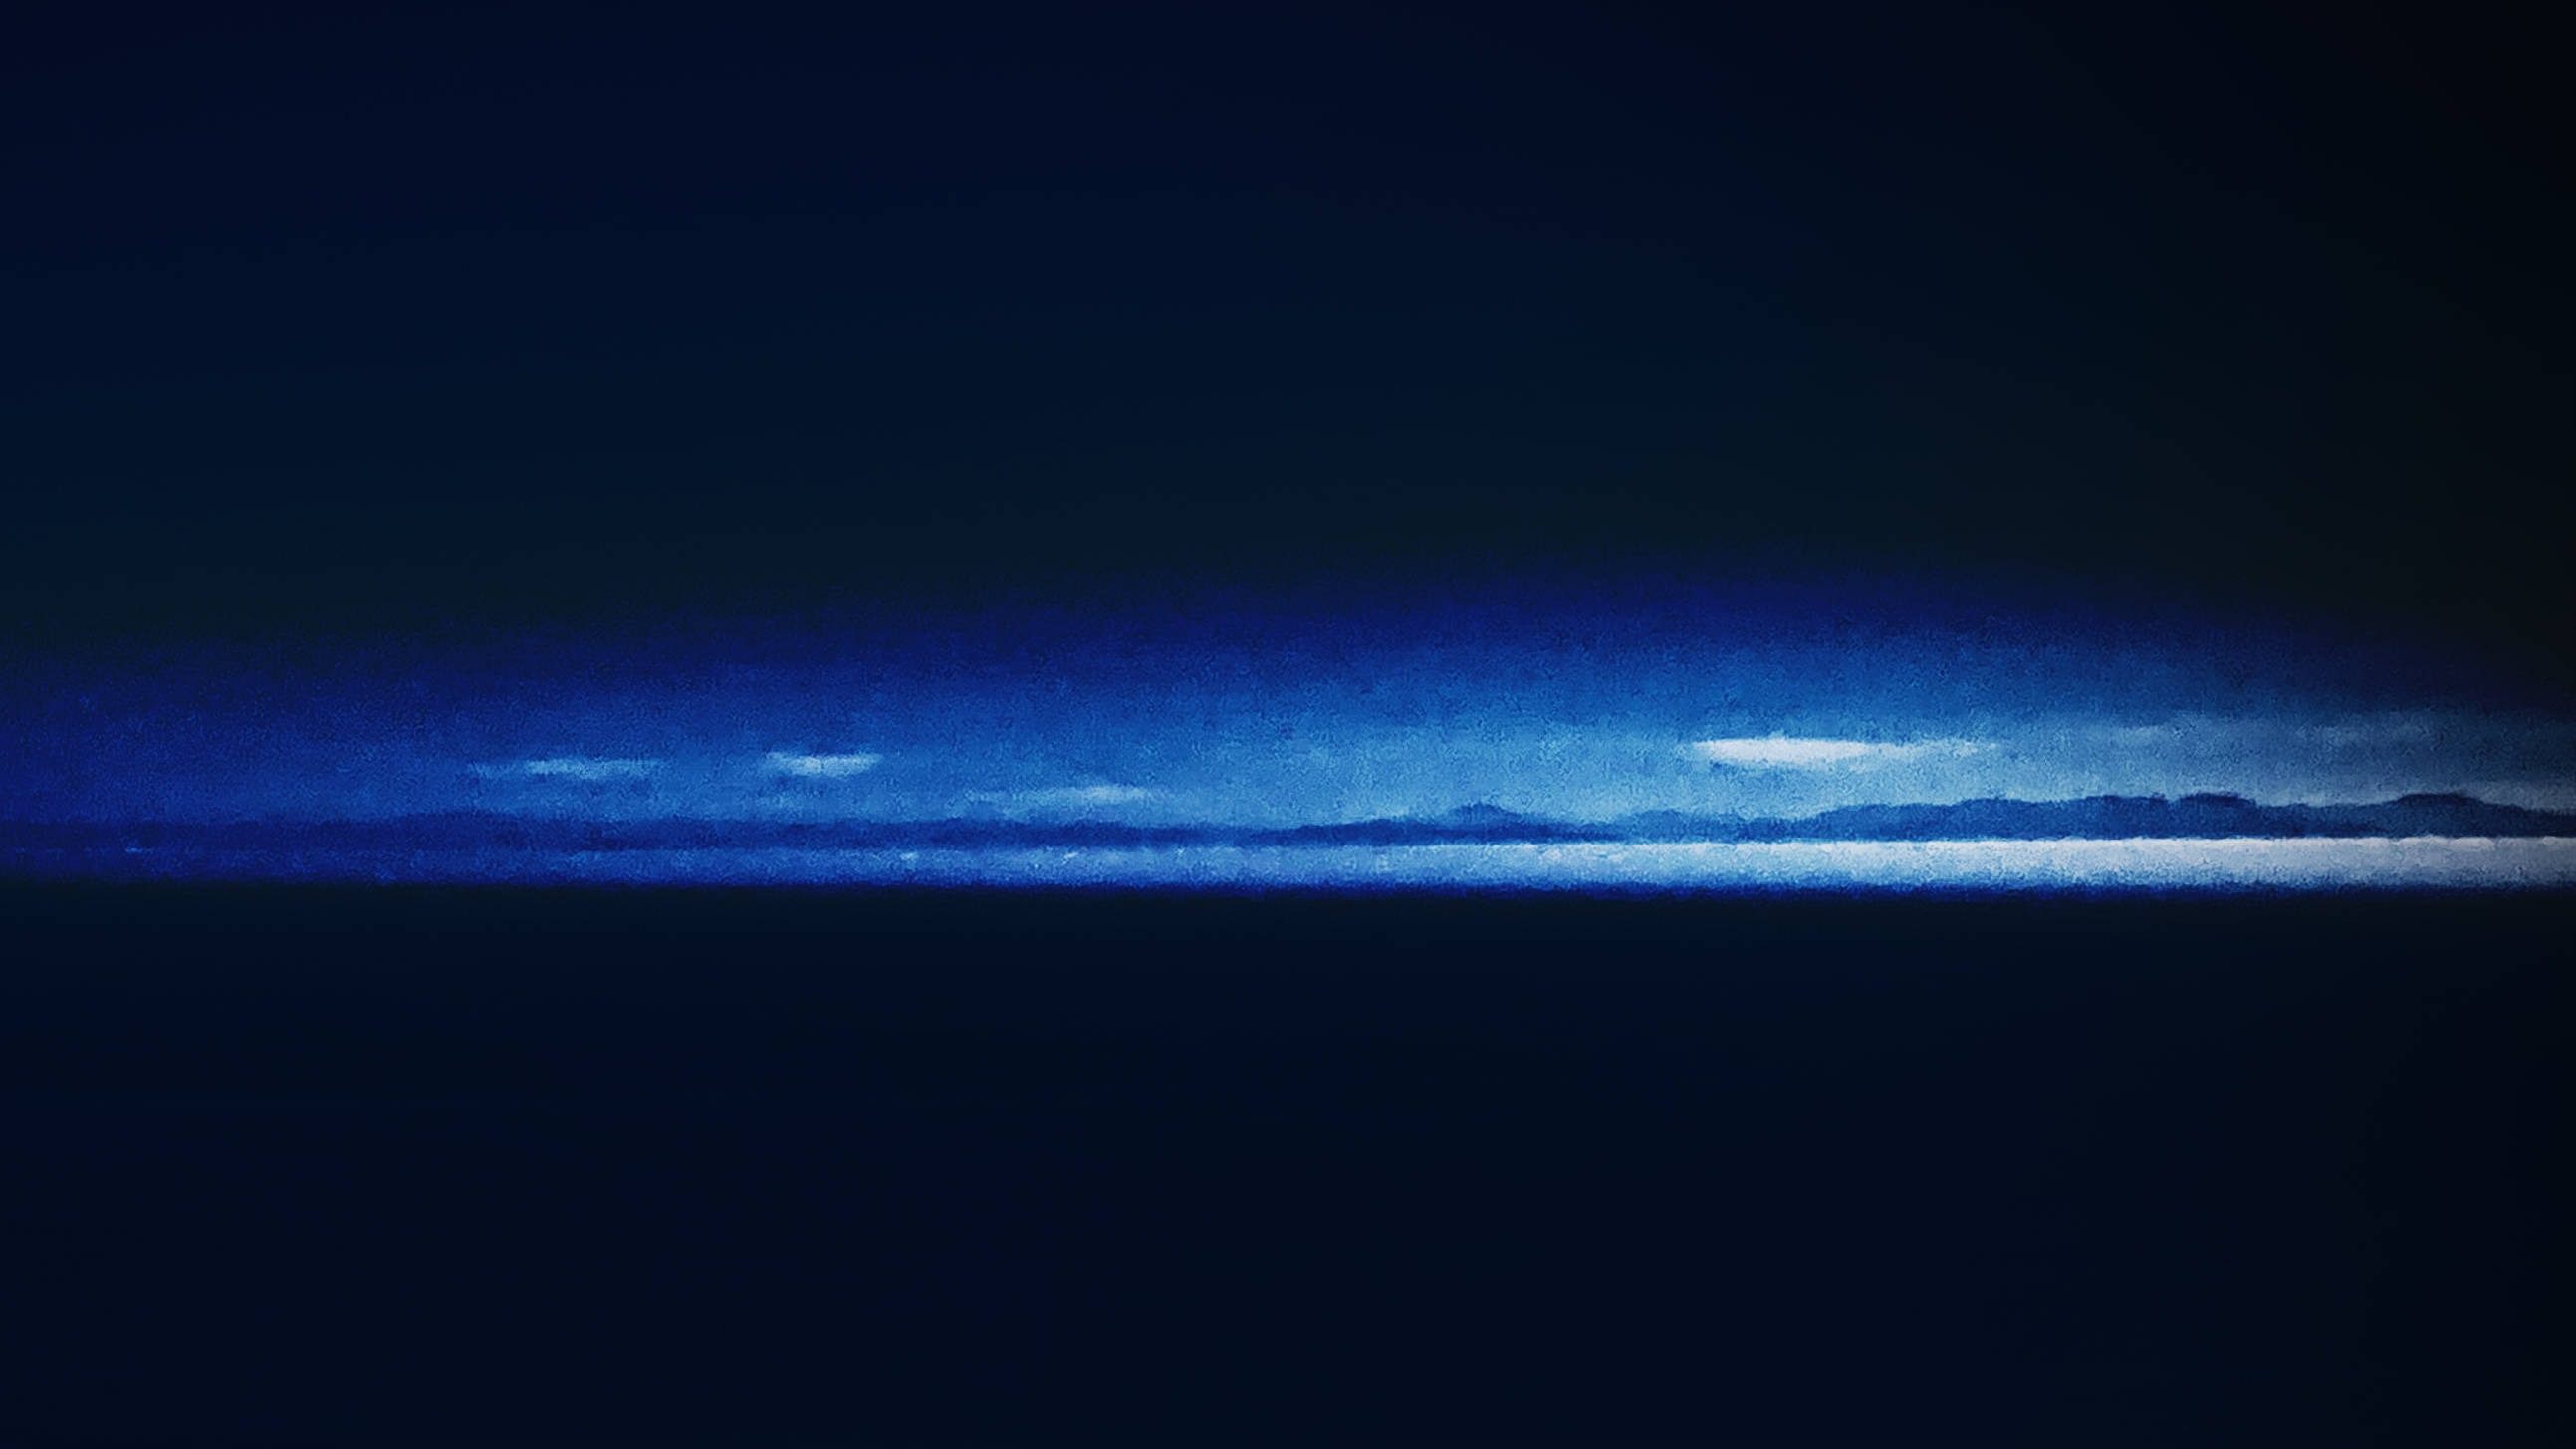 stylized dark photo of the ocean with a chain of mountains at the horizon